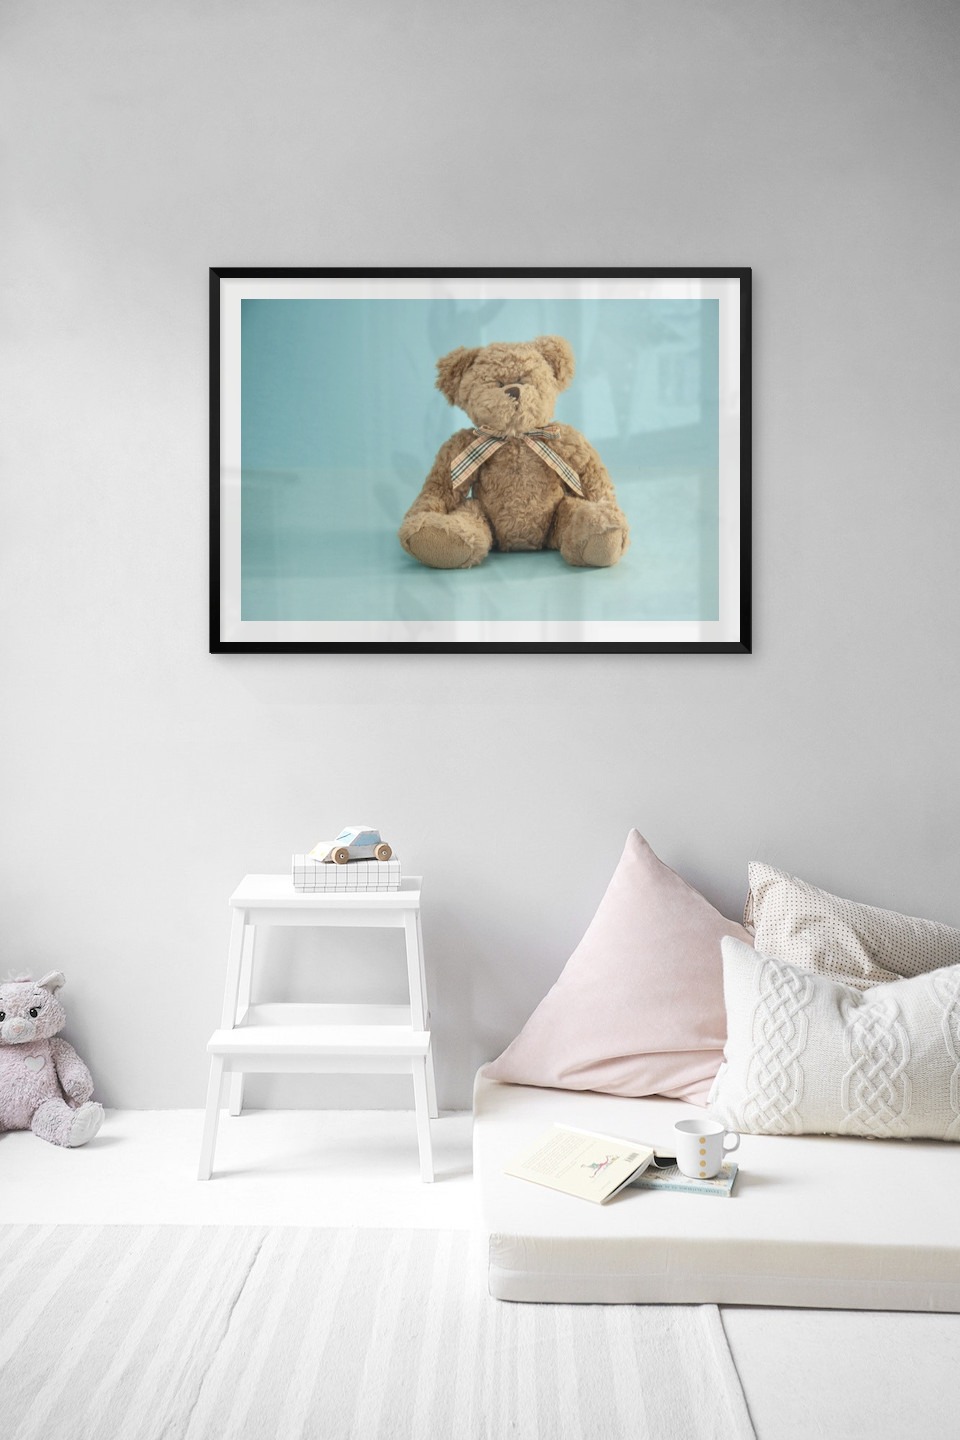 Gallery wall with picture frame in black in size 70x100 with print "Teddy bear and blue"